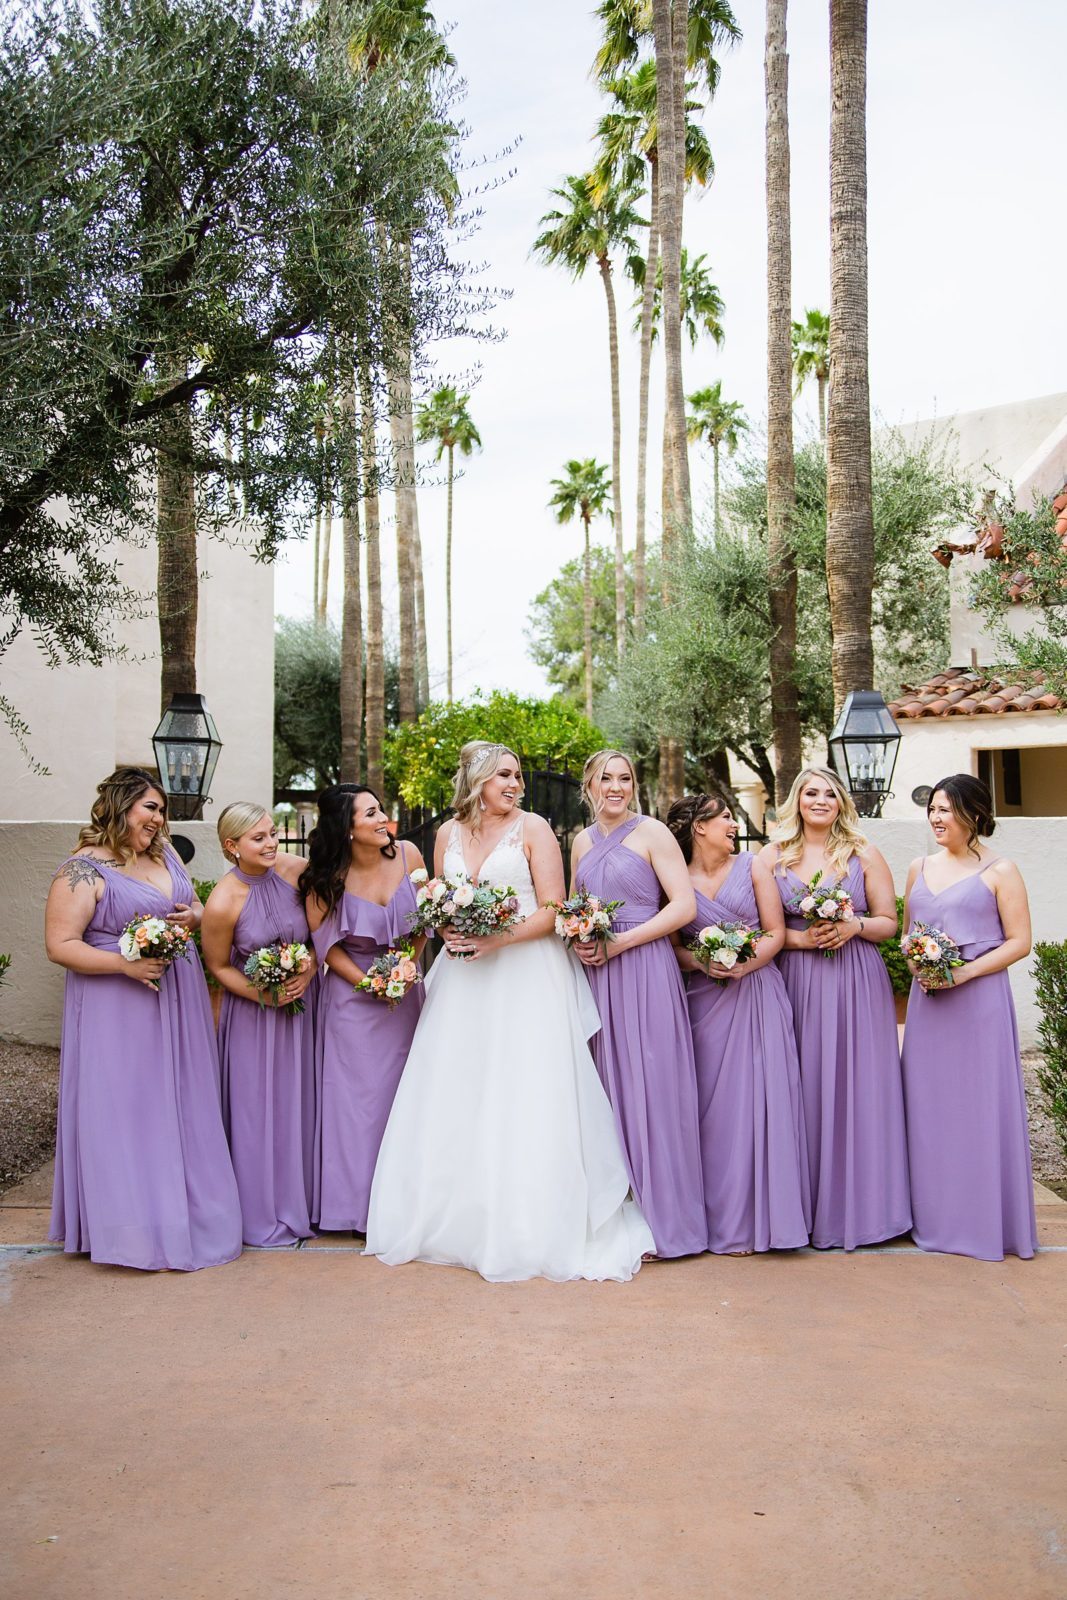 Bride and bridesmaids laughing together at The Scottsdale Resort at McCormick Ranch wedding by Scottsdale wedding photographer PMA Photography.